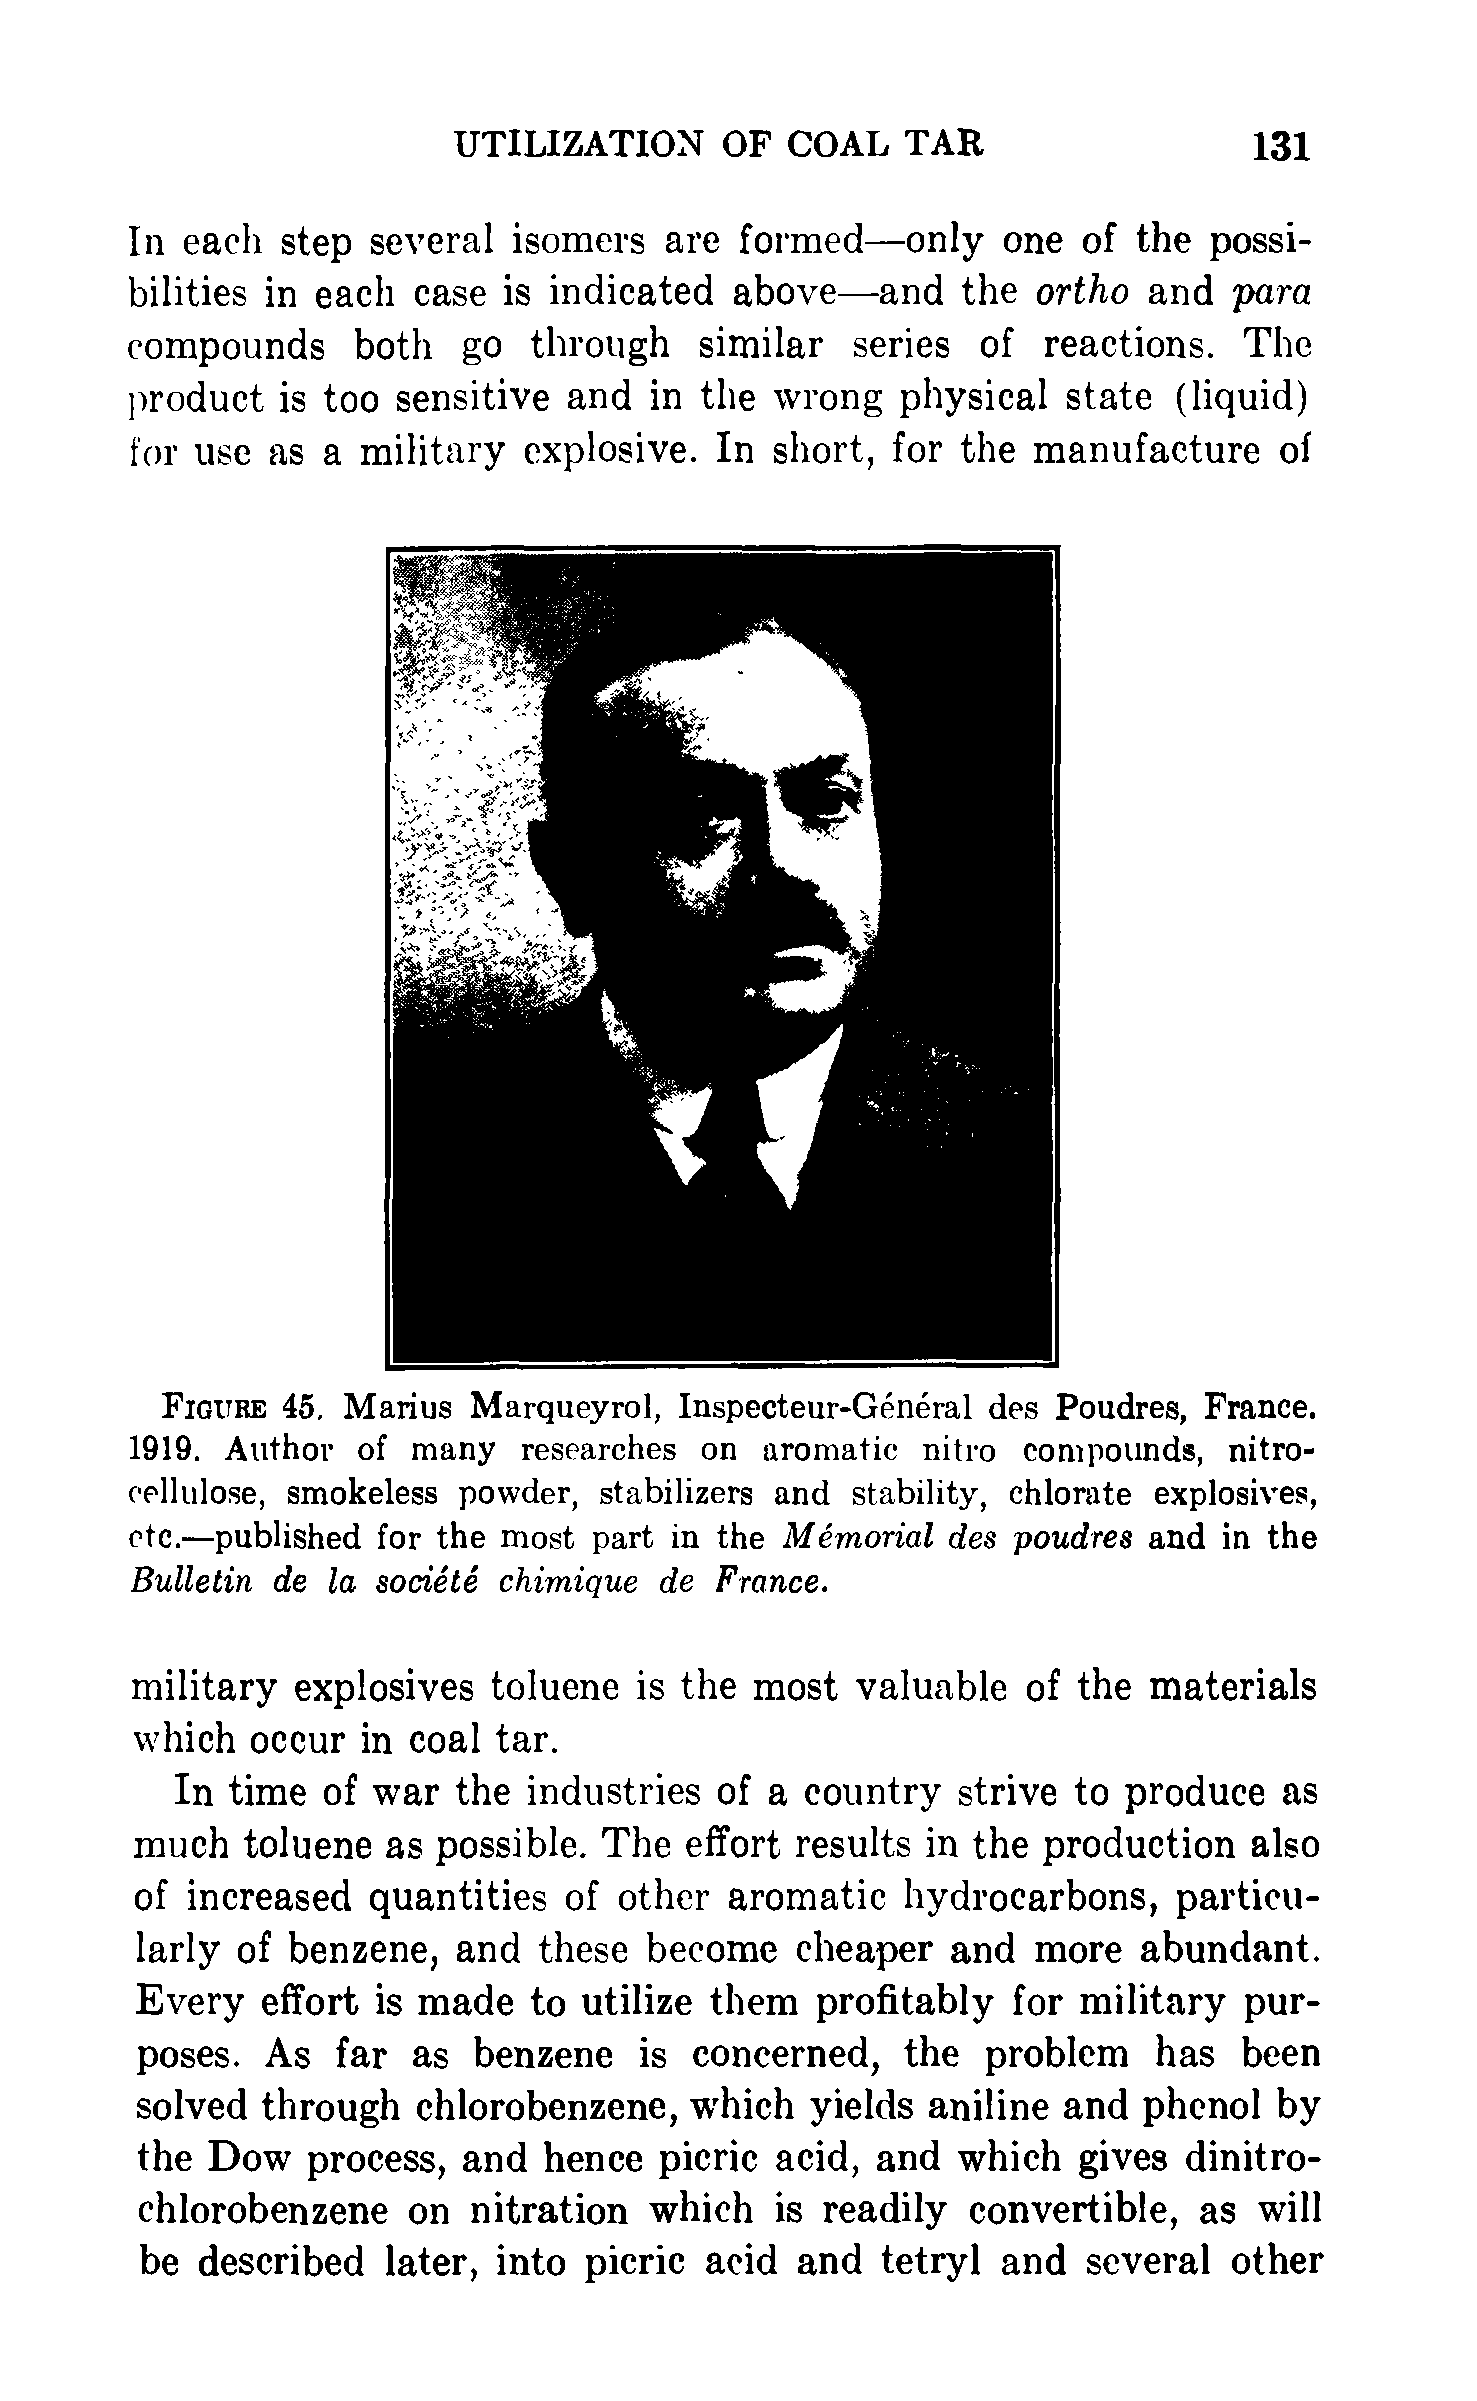 Figure 45. Marius Marqueyrol, Inspecteur-General des Poudres, France. 1919. Author of many researches on aromatic nitro compounds, nitrocellulose, smokeless powder, stabilizers and stability, chlorate explosives, etc.—published for the most part in the Memorial des poudres and in the Bulletin de la societe chimique de France.